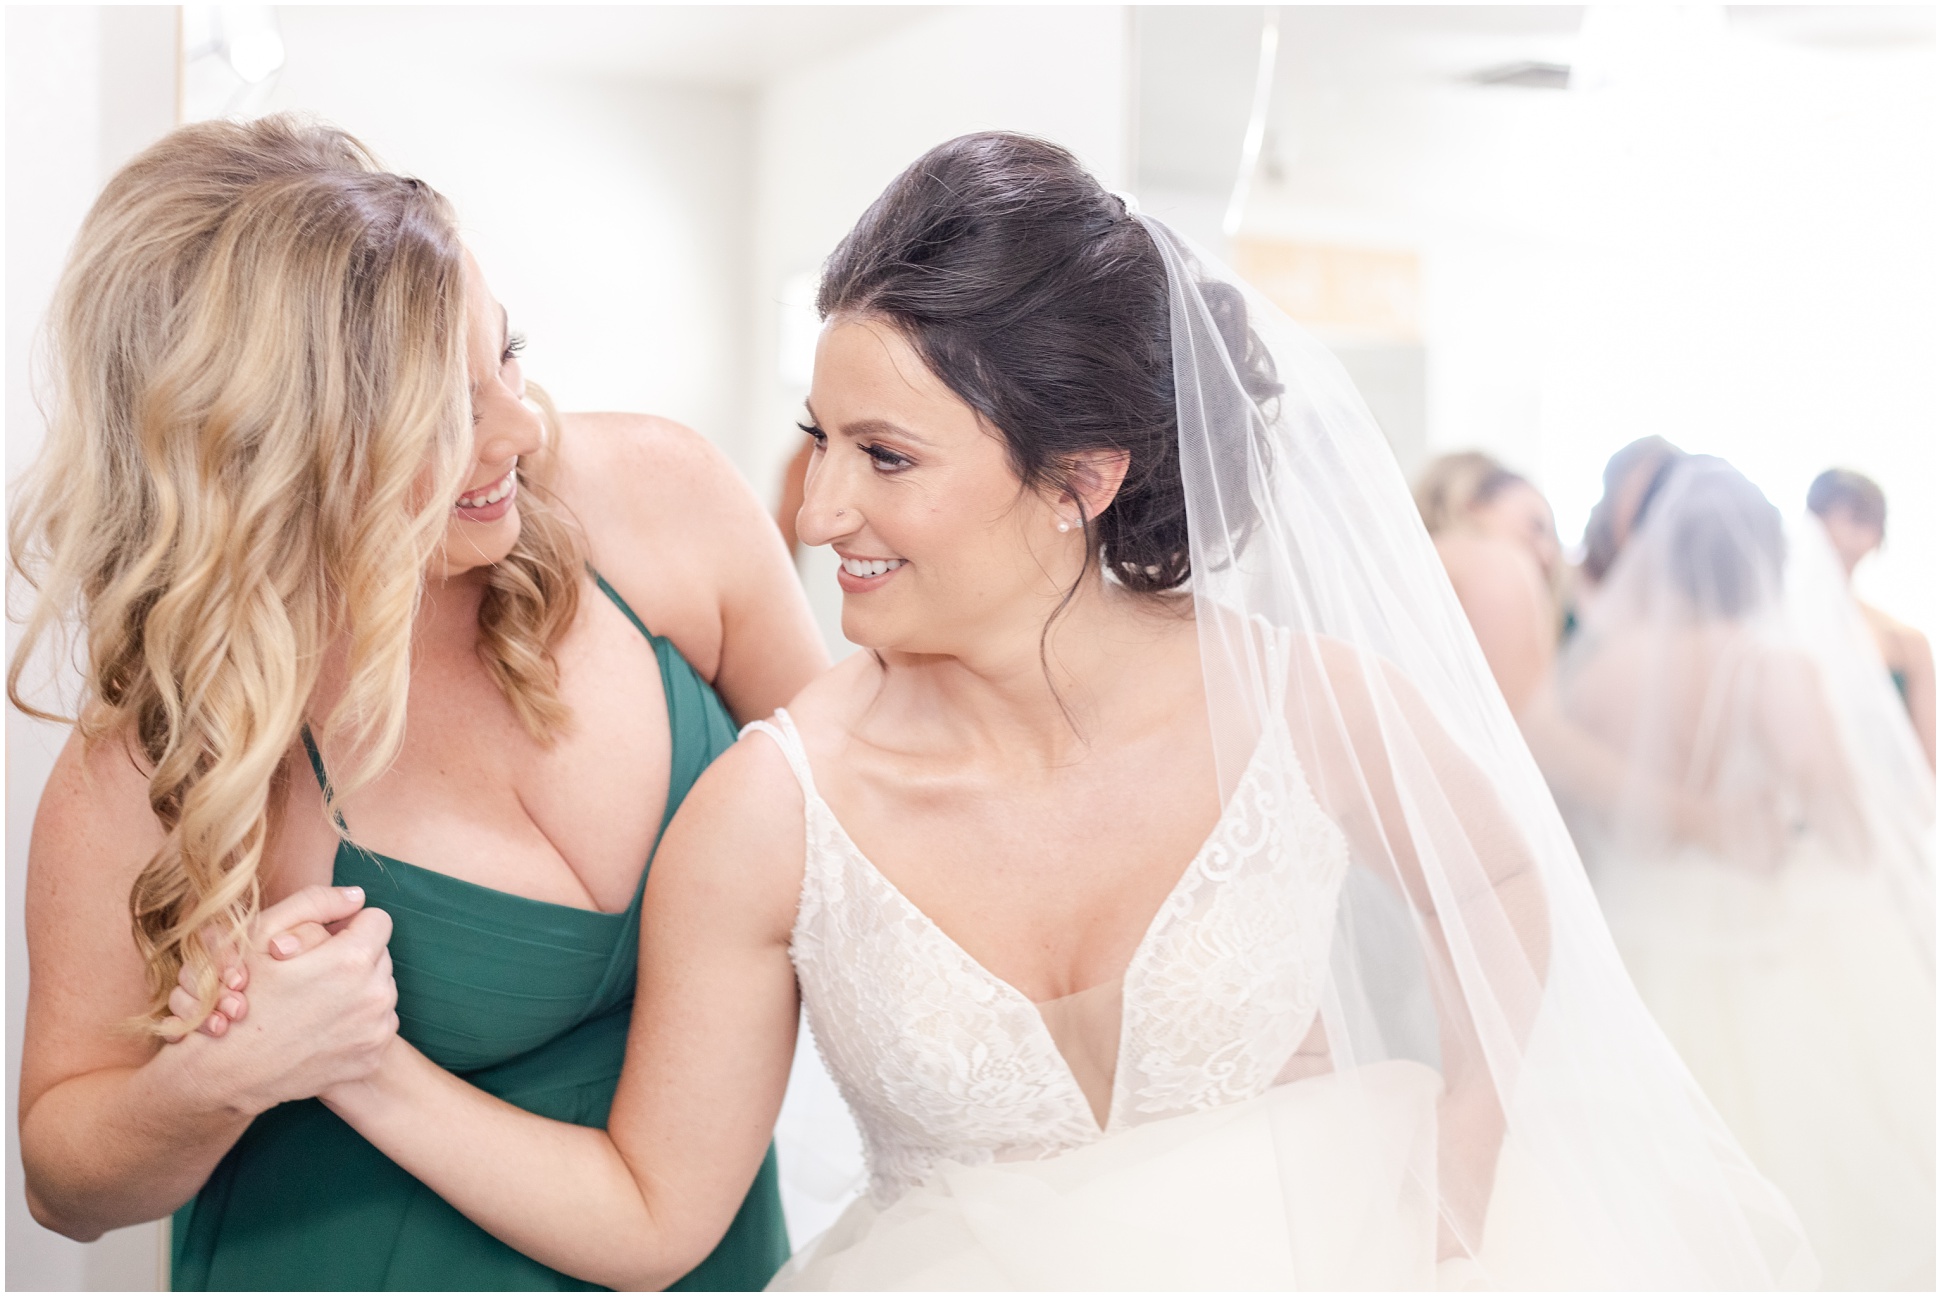 Bridesmaid holding brides hand in dresses smiling at each other